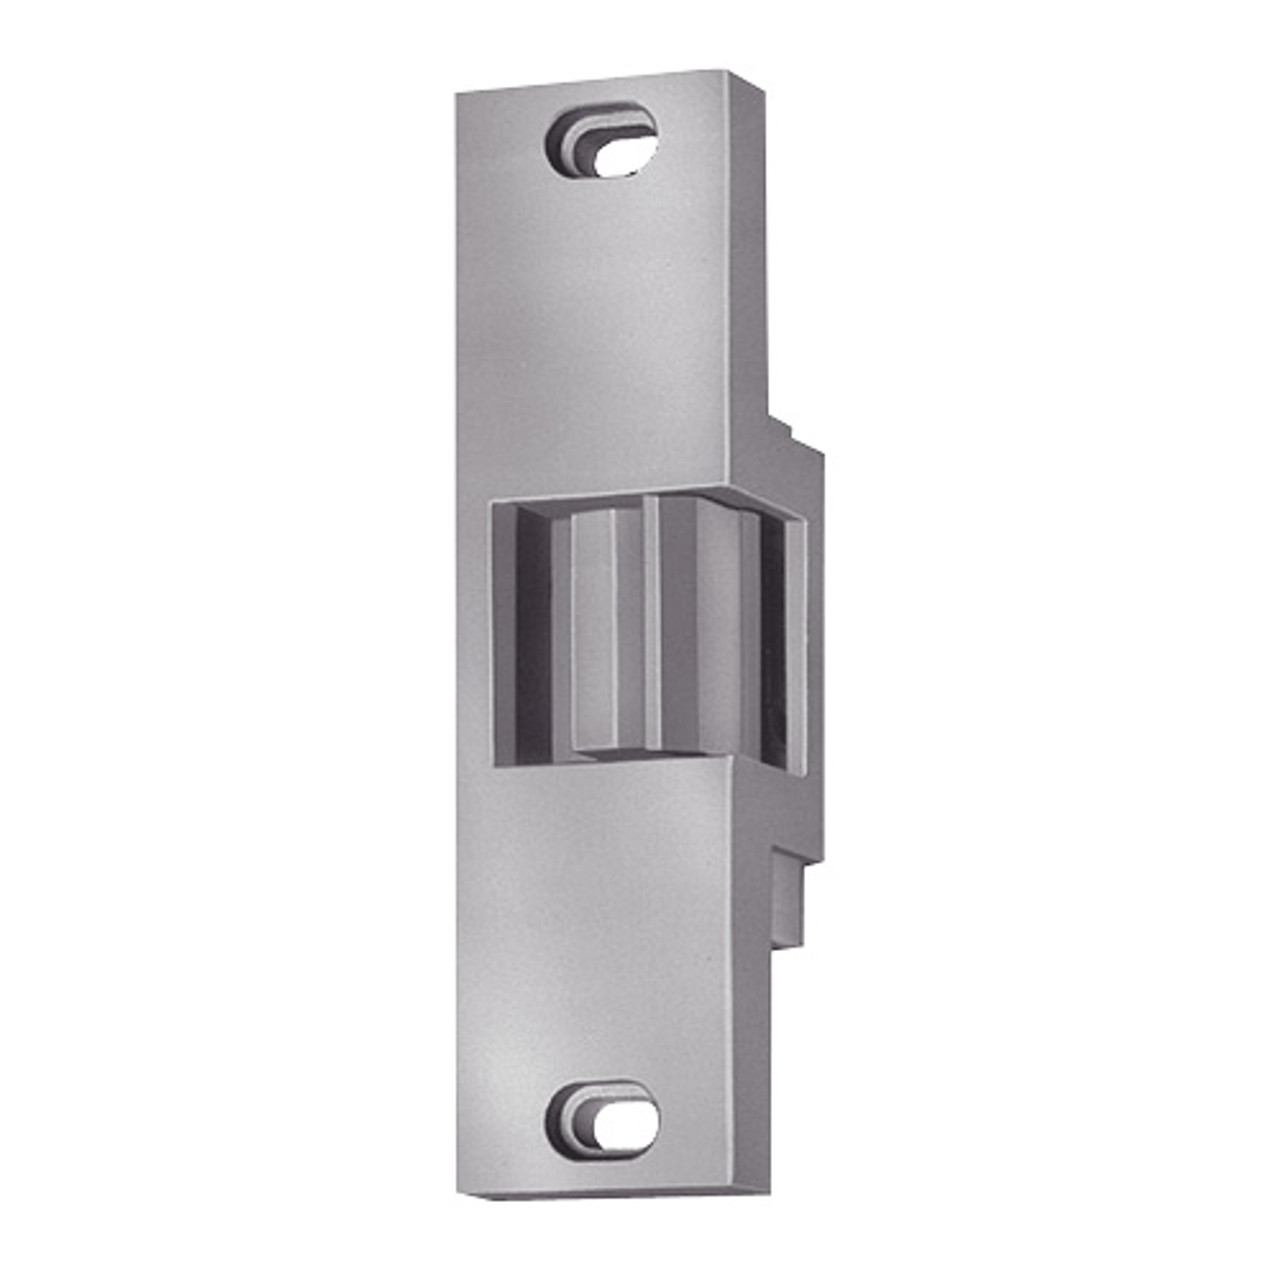 6113-DS-LC-12VDC-US32D Von Duprin Electric Strike in Satin Stainless Steel Finish